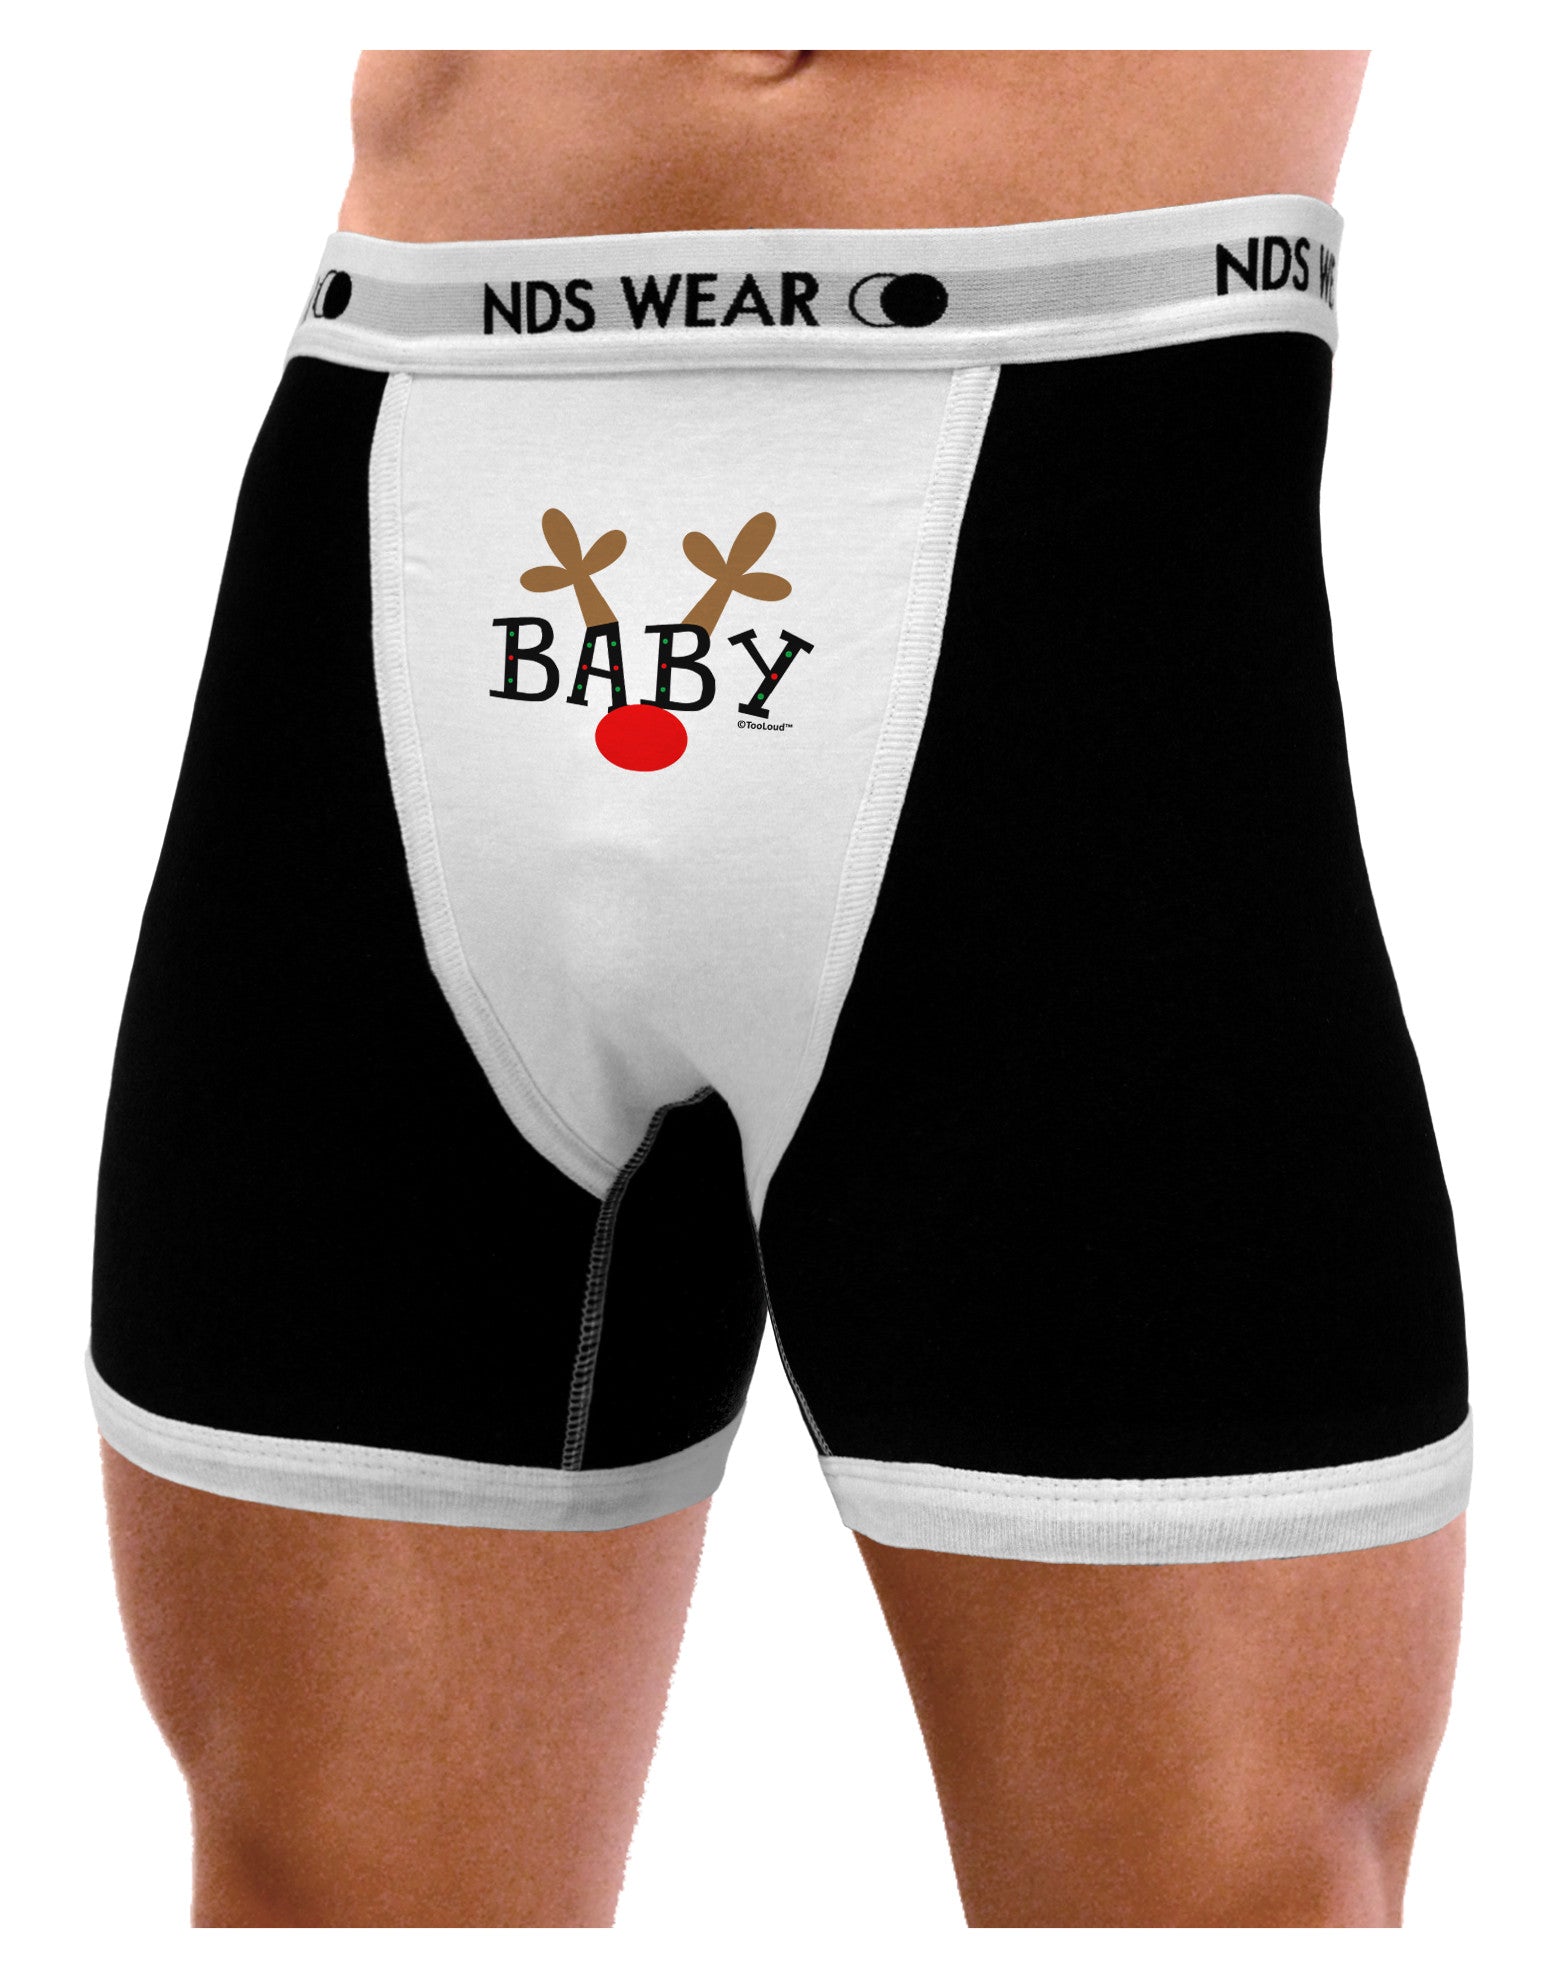 Matching Family Christmas Design - Reindeer - Baby Mens NDS Wear Boxer  Brief Underwear by TooLoud